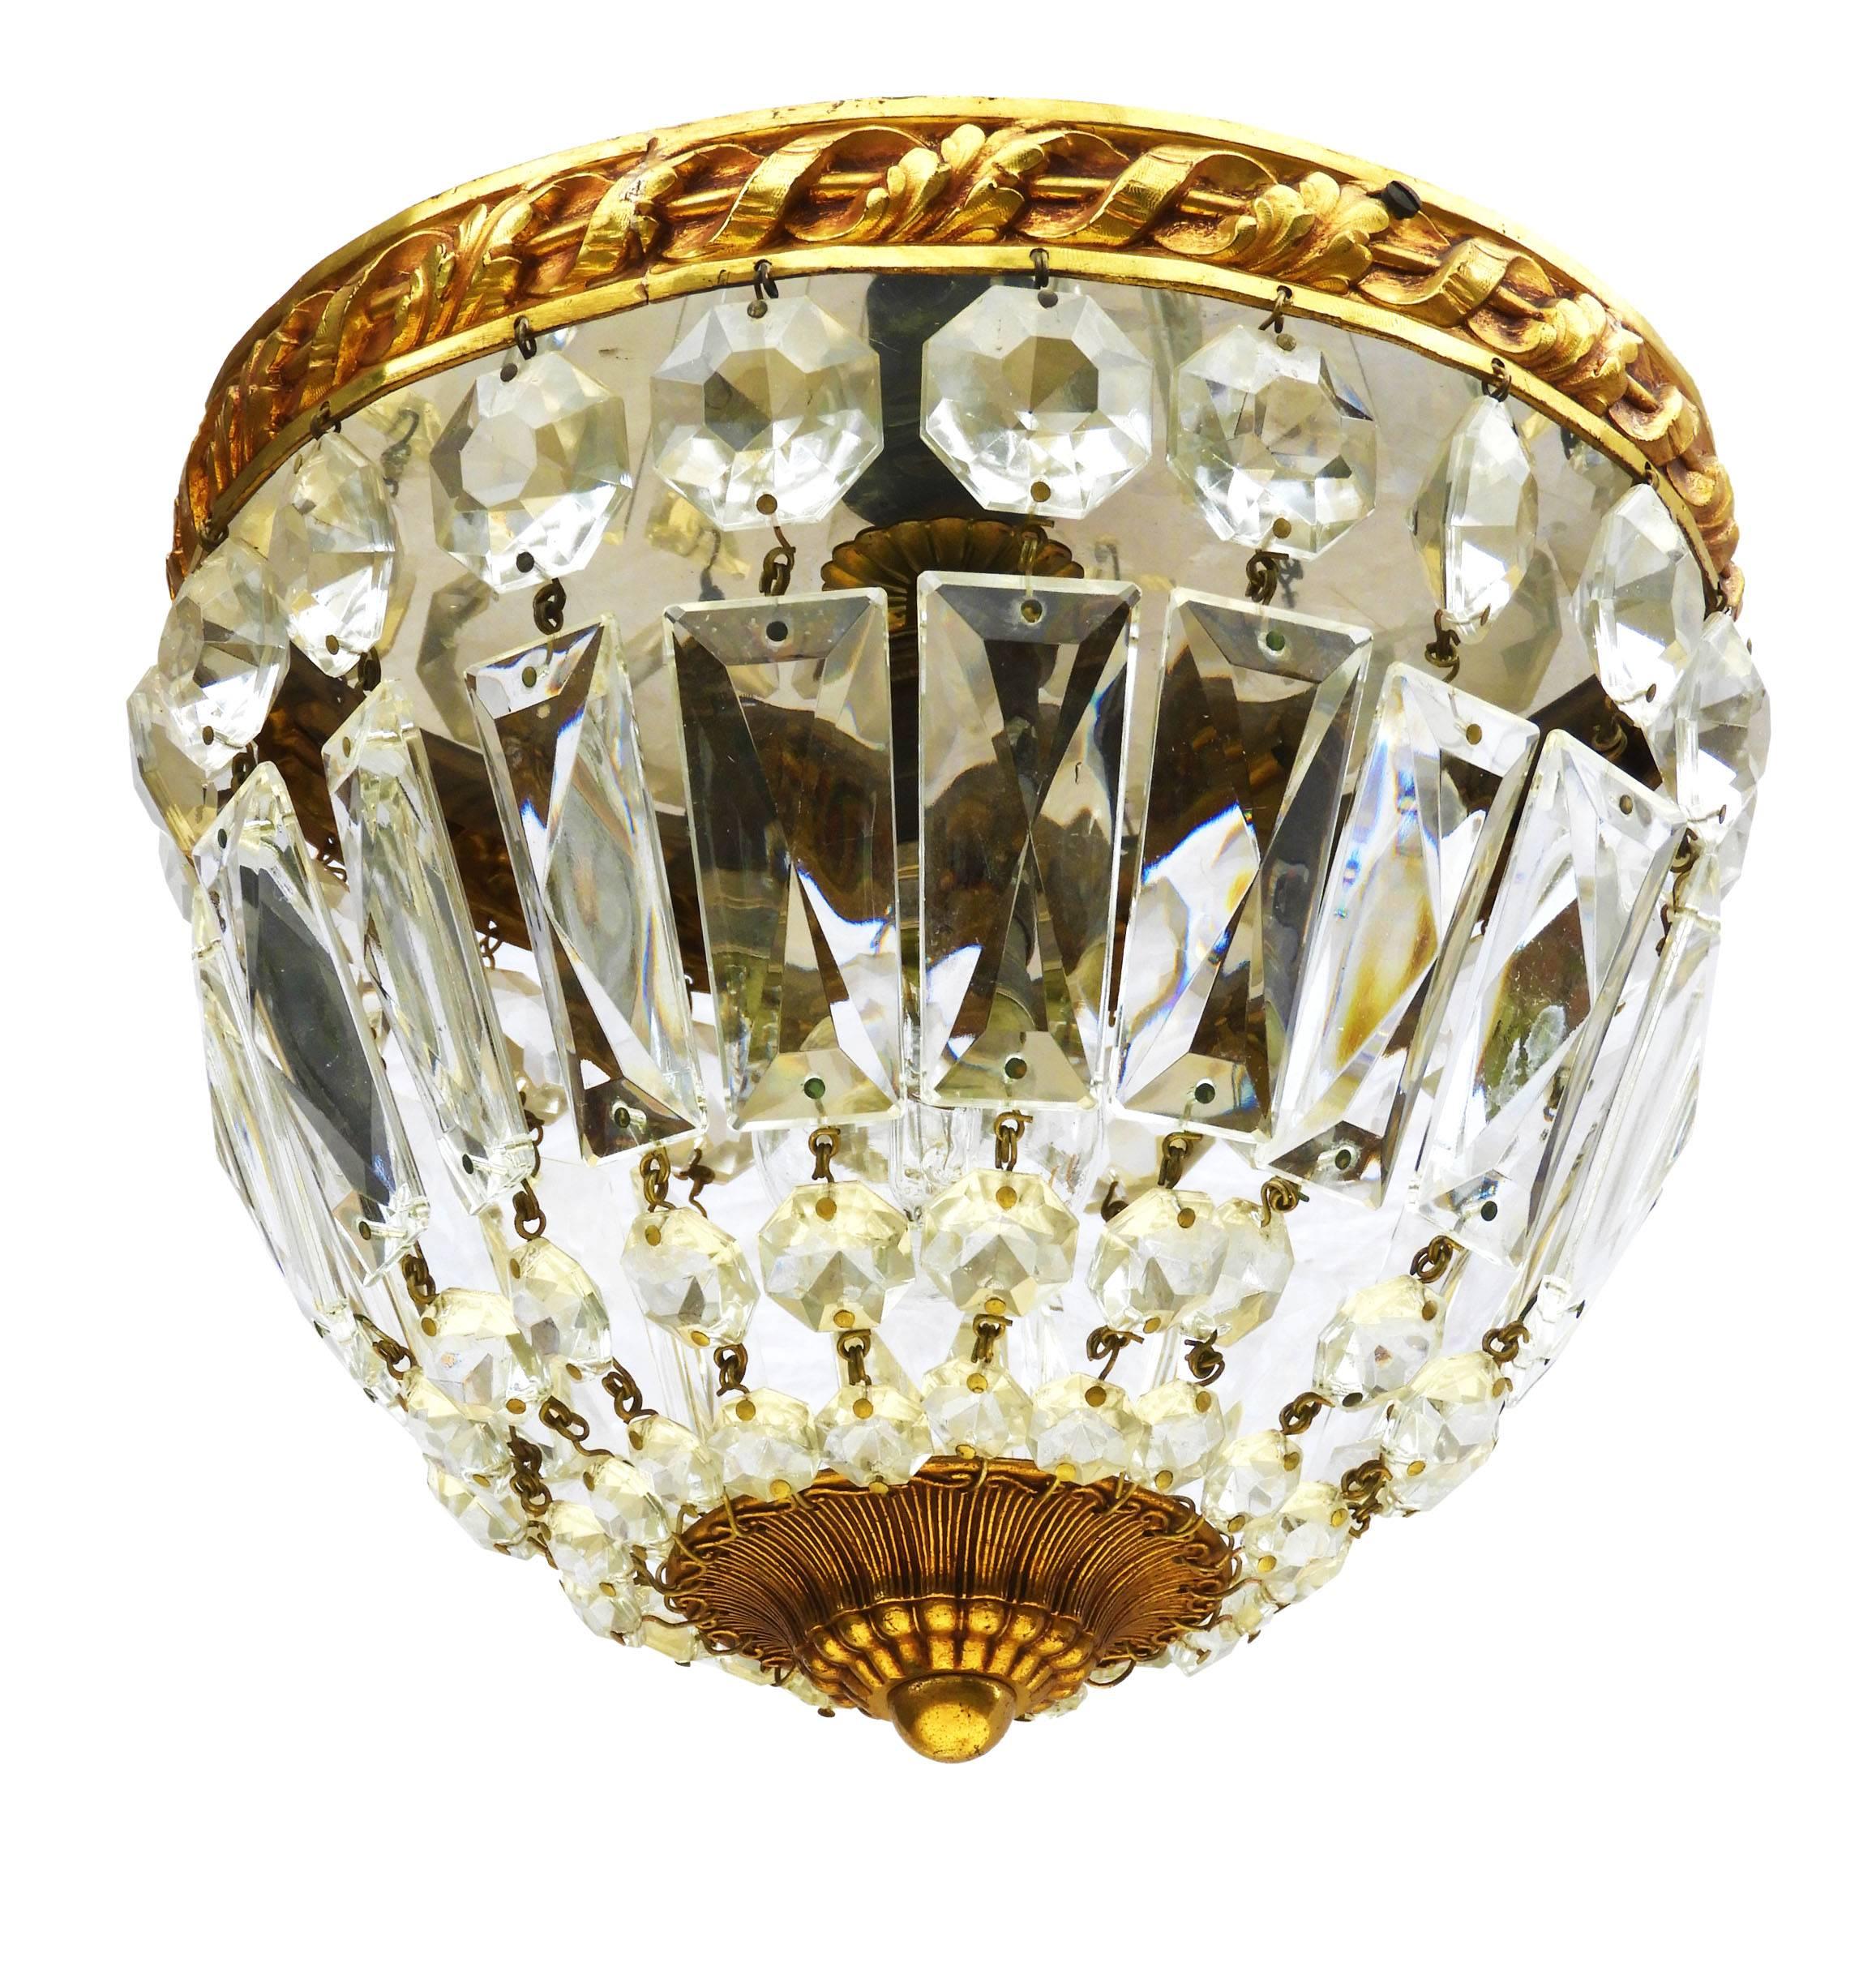 French Flush Mount Ceiling Light  with crystal cut faceted prism glass and gilded bronze c1920-30 Louis XVI revival
Acanthus leaf band
In very good original condition, nice patina with no losses to glass
Could equally be installed and hung as a